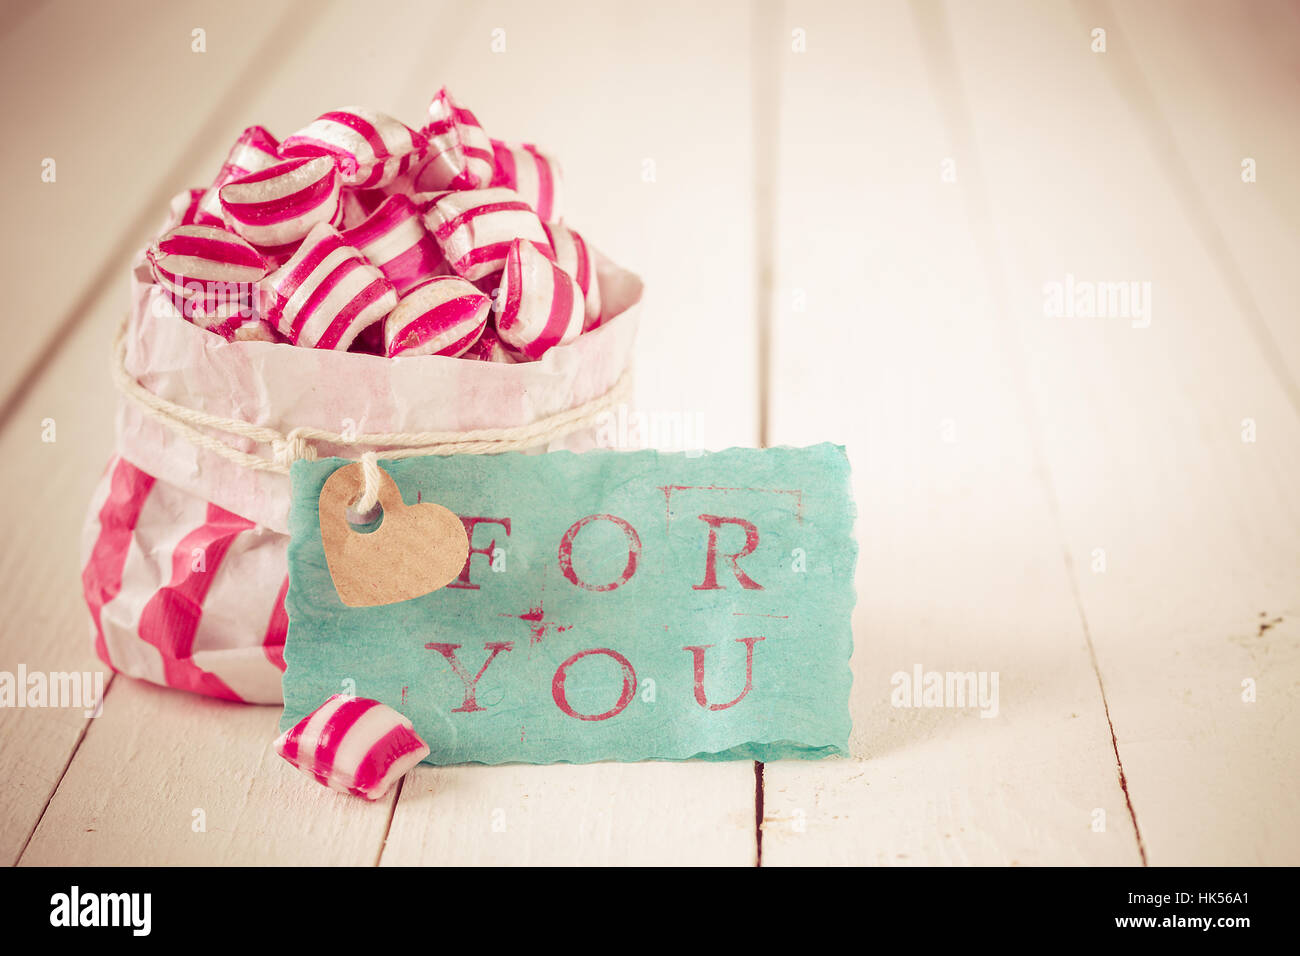 present, greeting, beautiful, beauteously, nice, sweets, model, design, Stock Photo